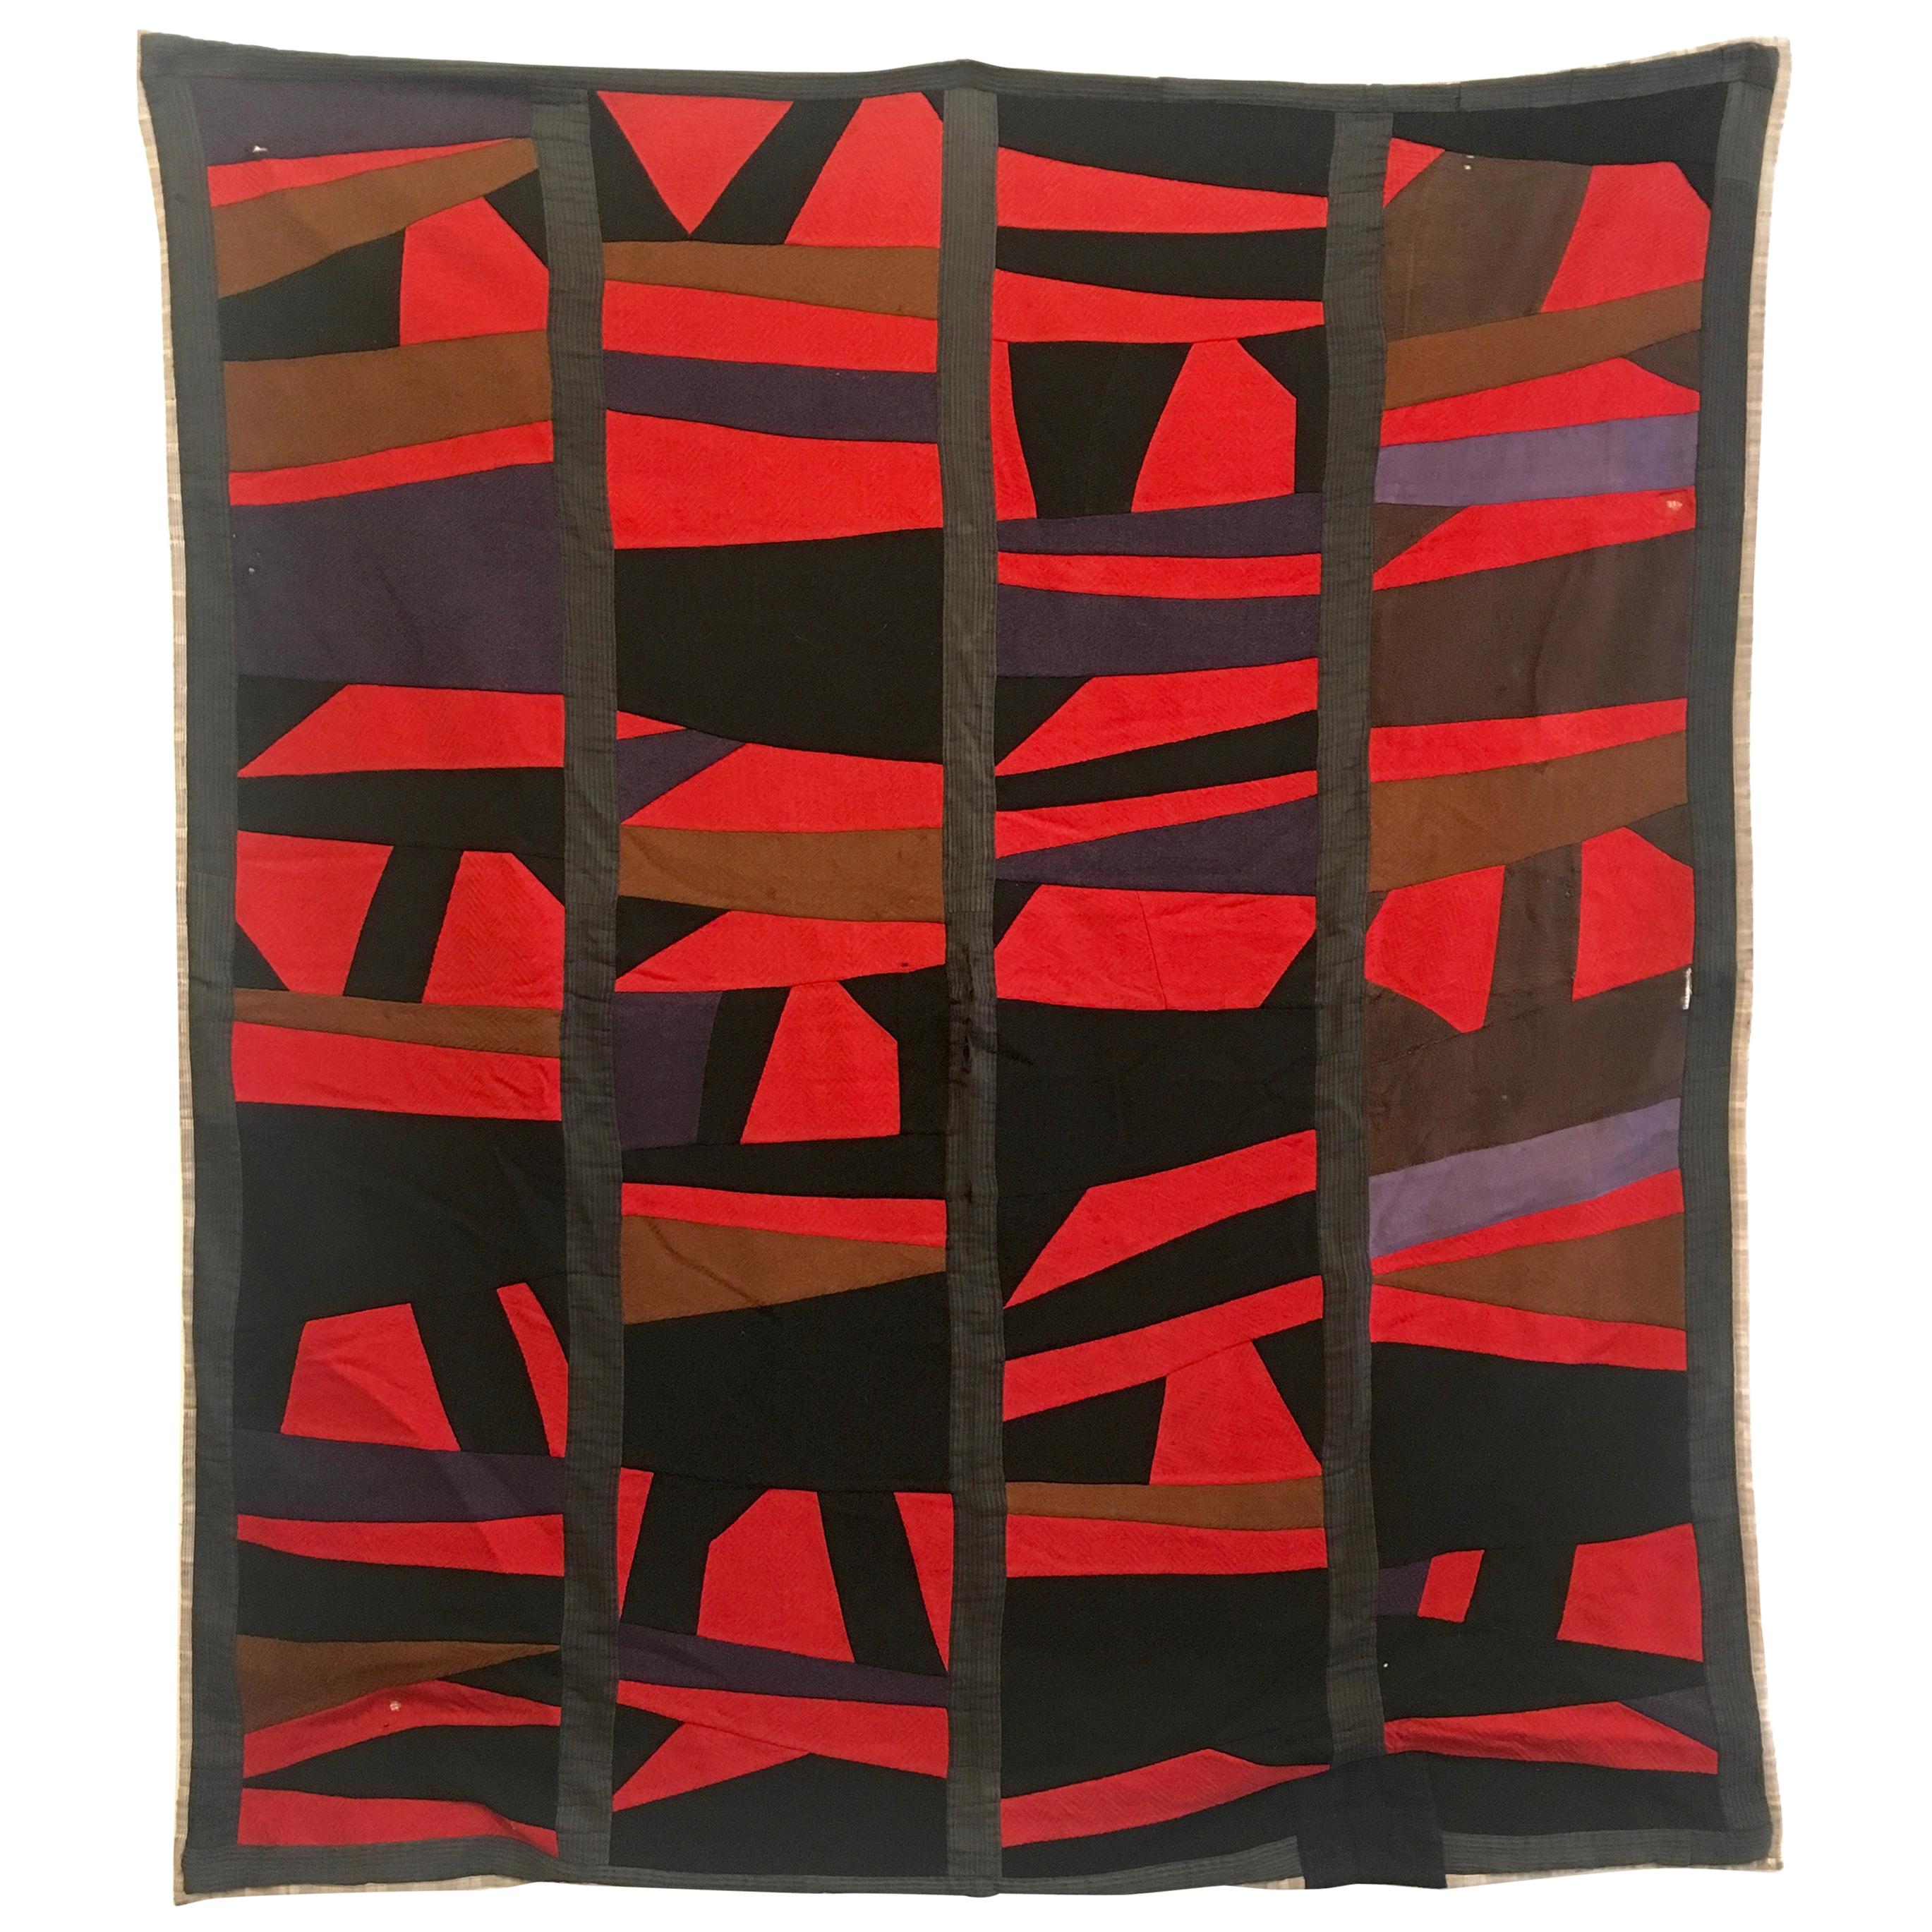 Outstanding African-American Quilt, Mid-20th Century Abstraction